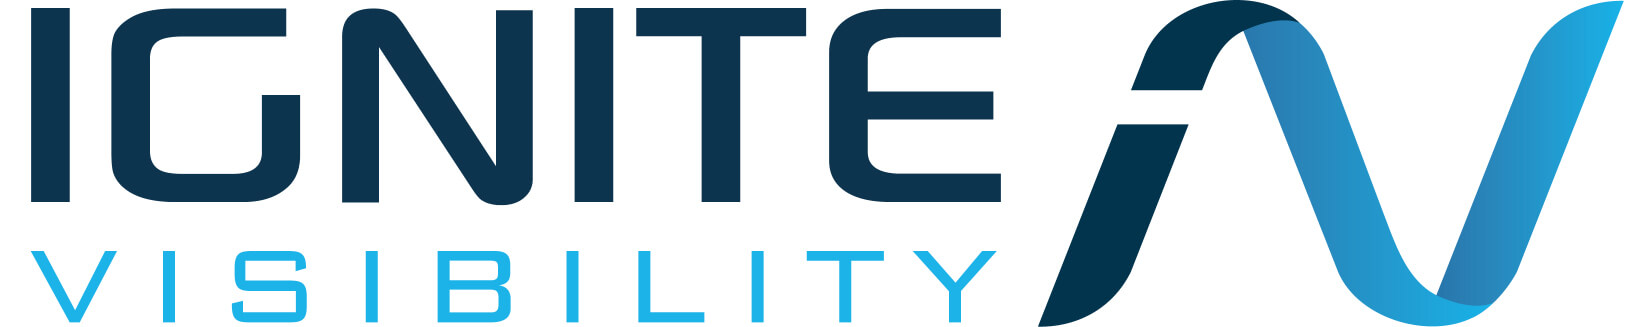 Top Corporate SEO Agency Logo: Ignite Visibility